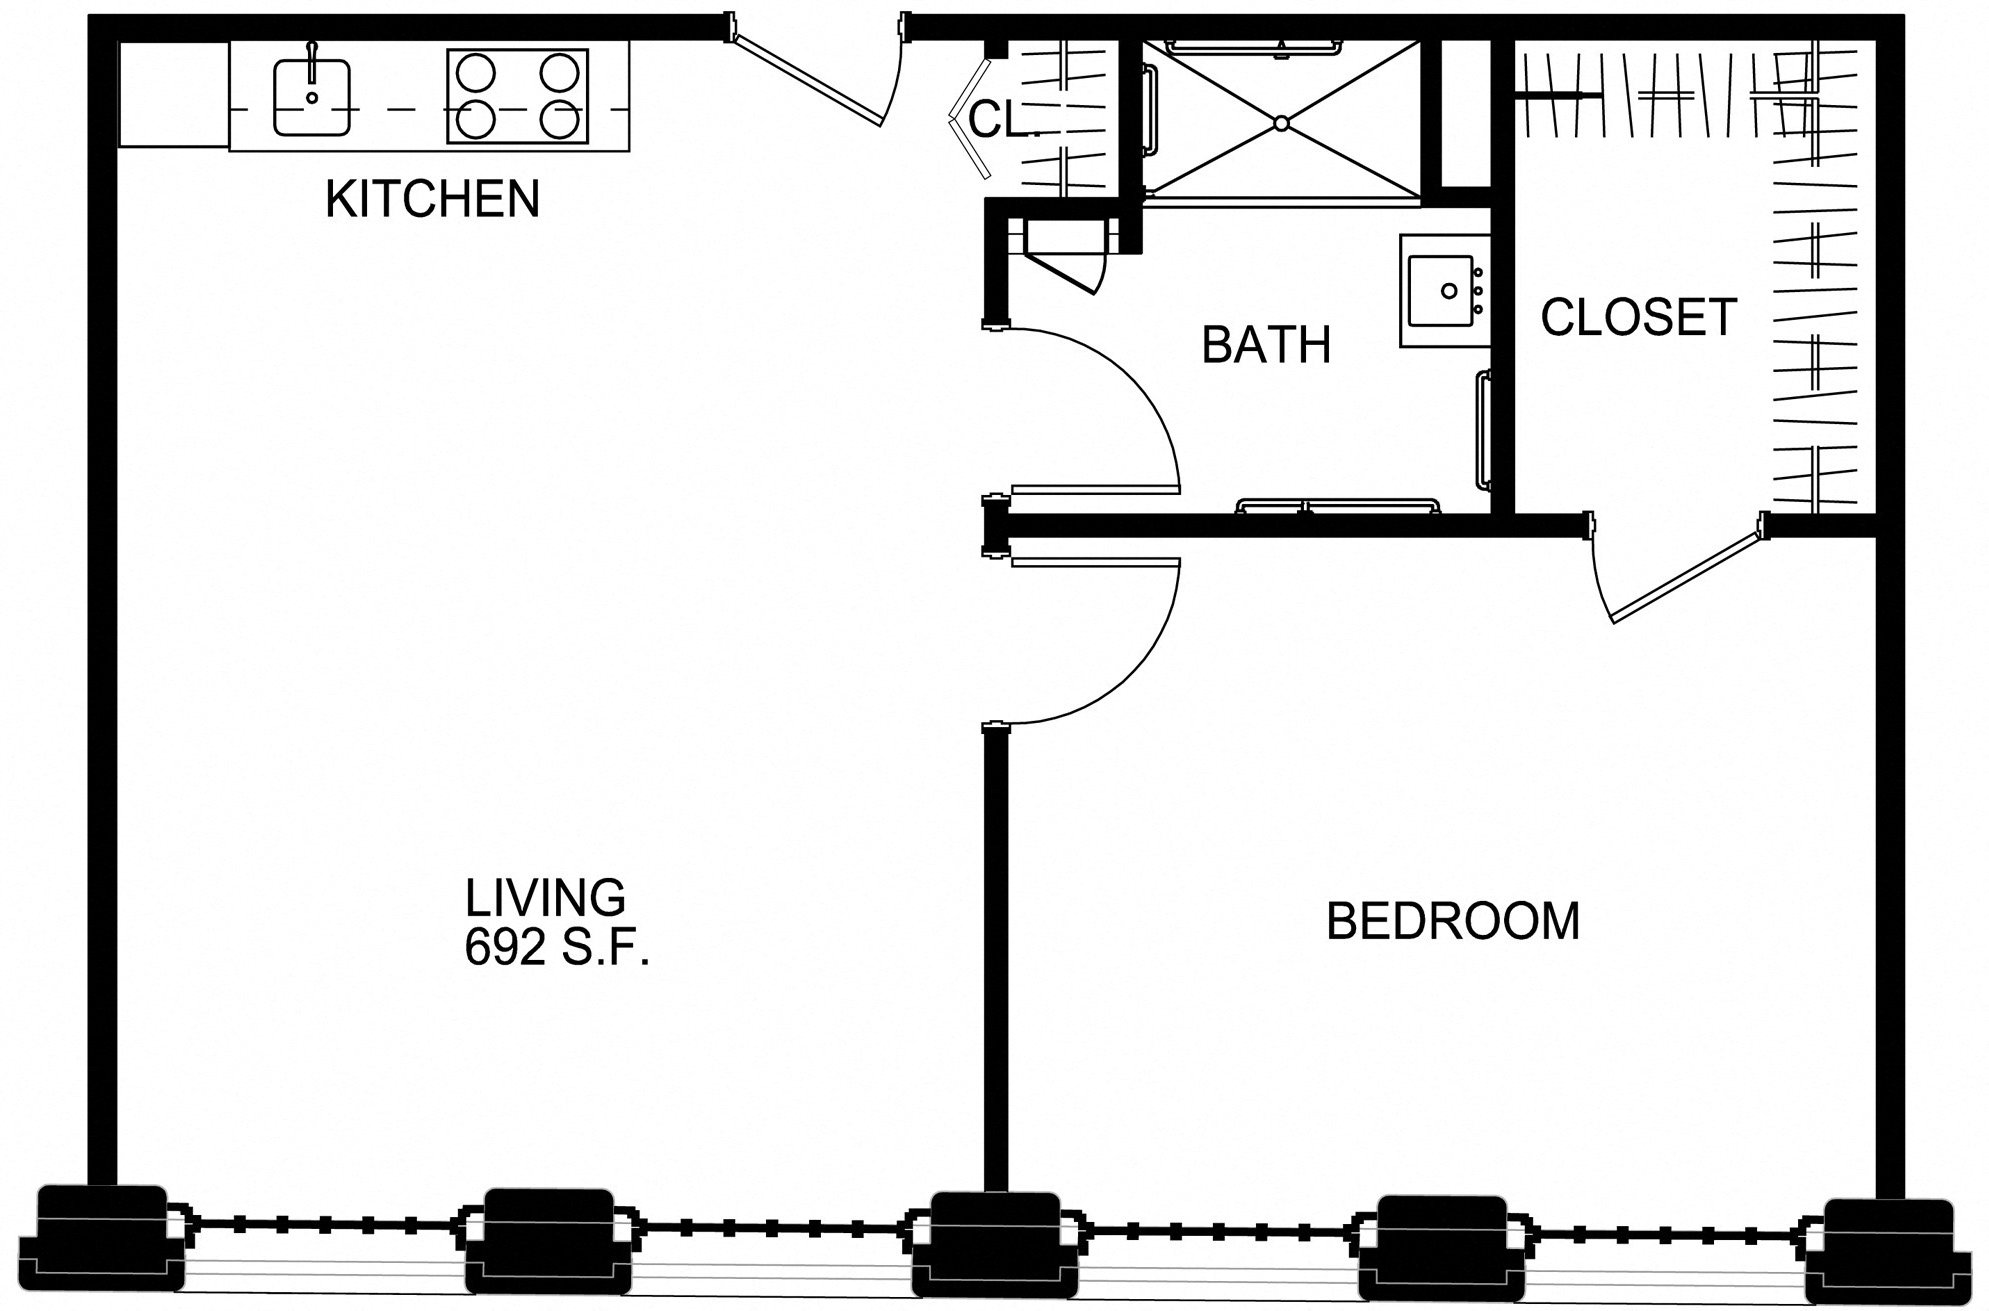 Floorplan for Apartment #S2321, 1 bedroom unit at Halstead Providence